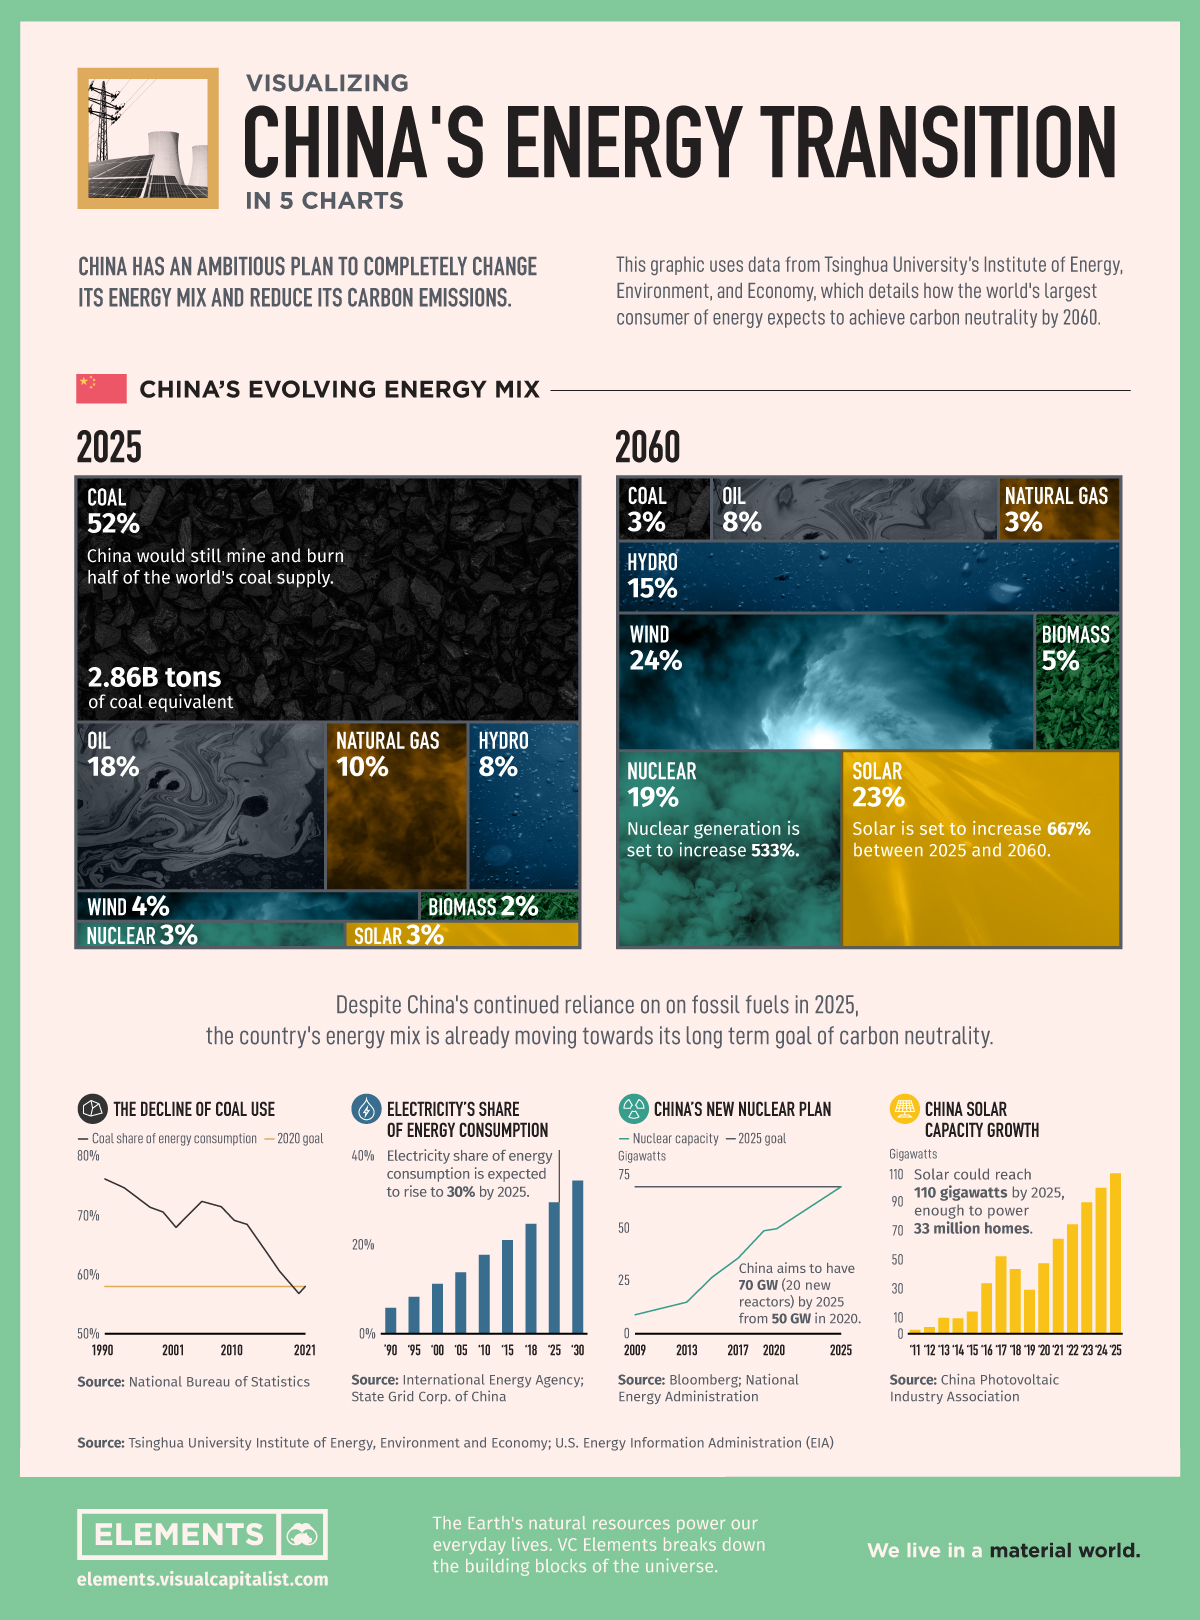 Visualizing China’s Energy Transition in 5 Charts Visual Capitalist